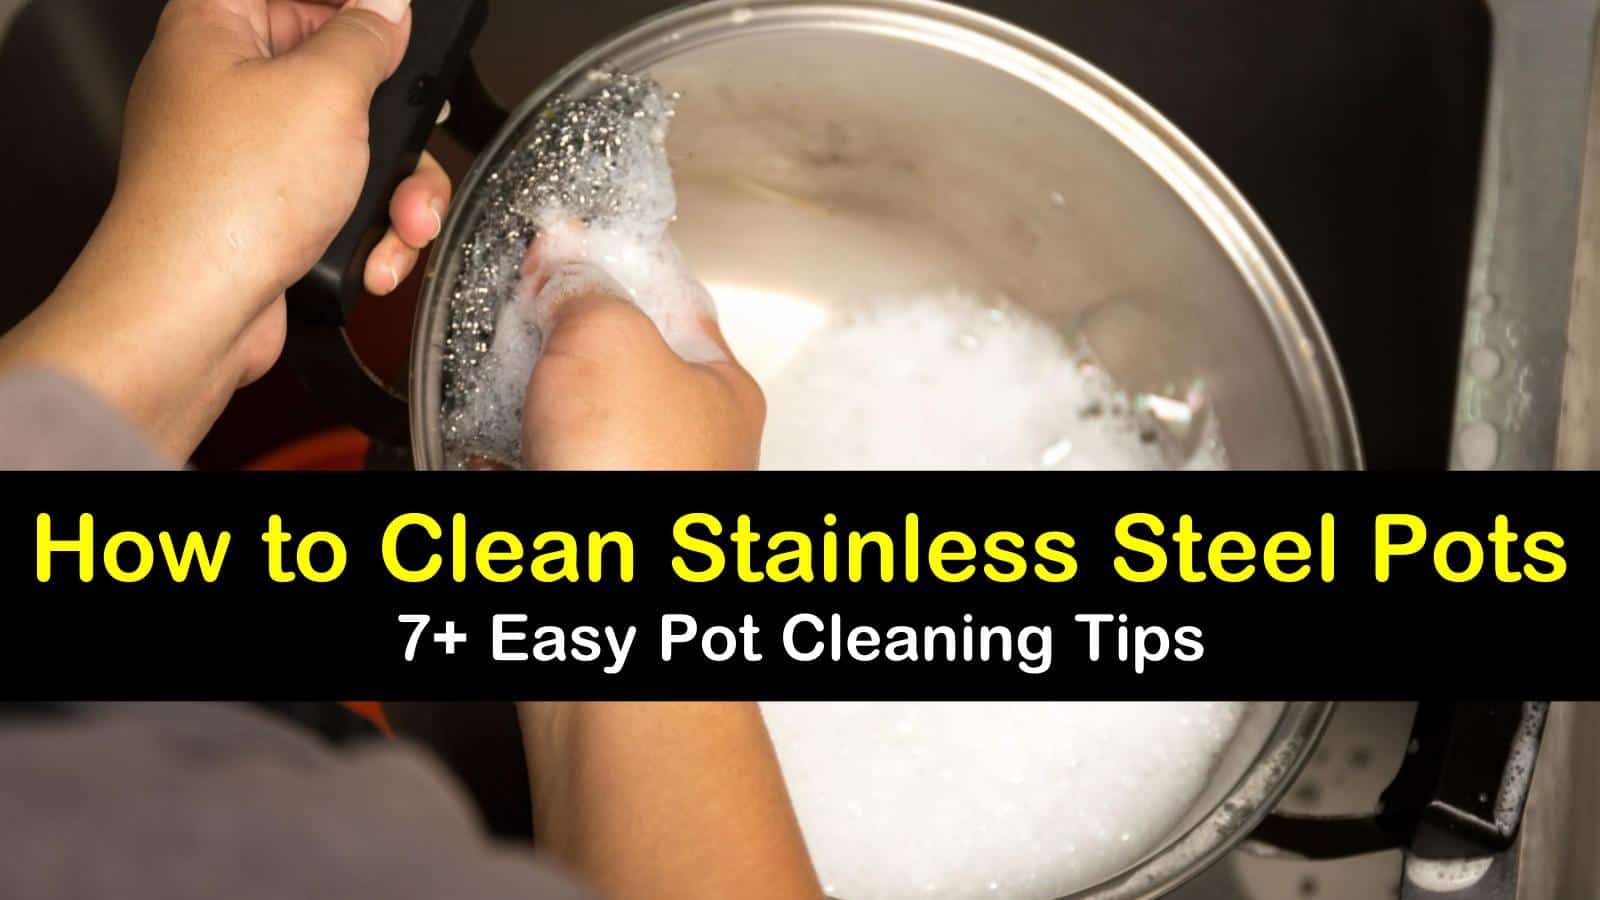 how to clean stainless steel pots titleimg1